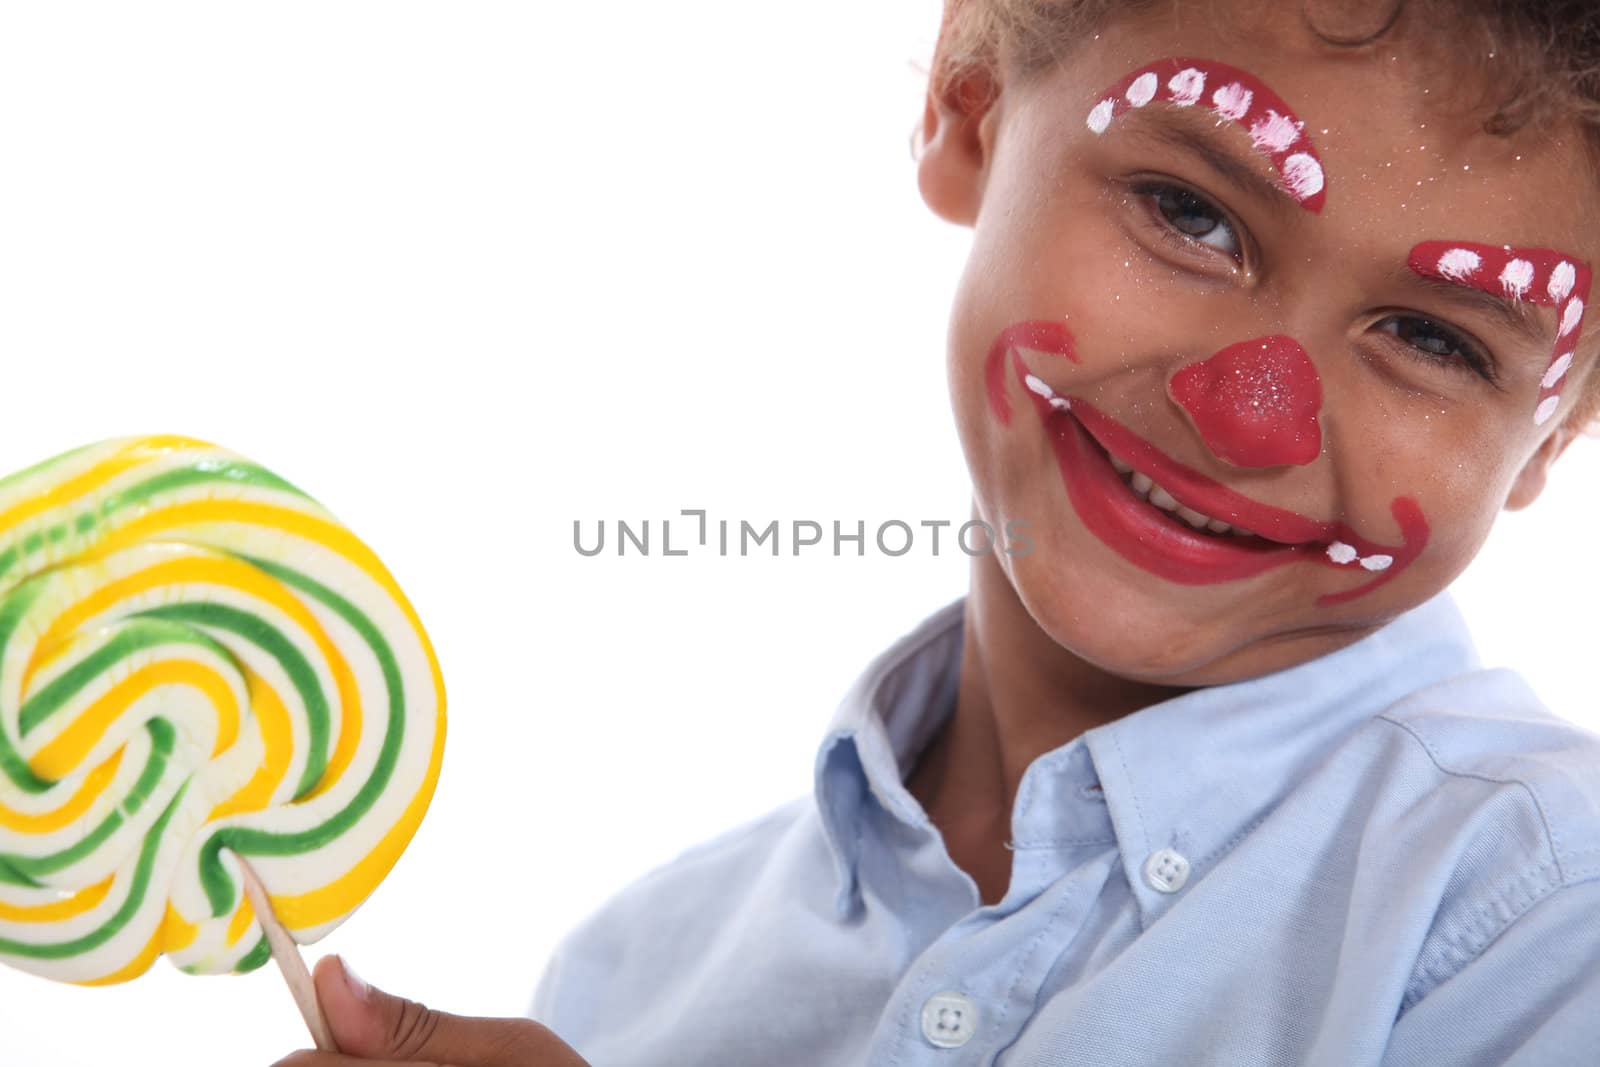 Boy made-up in clown with lollipop by phovoir